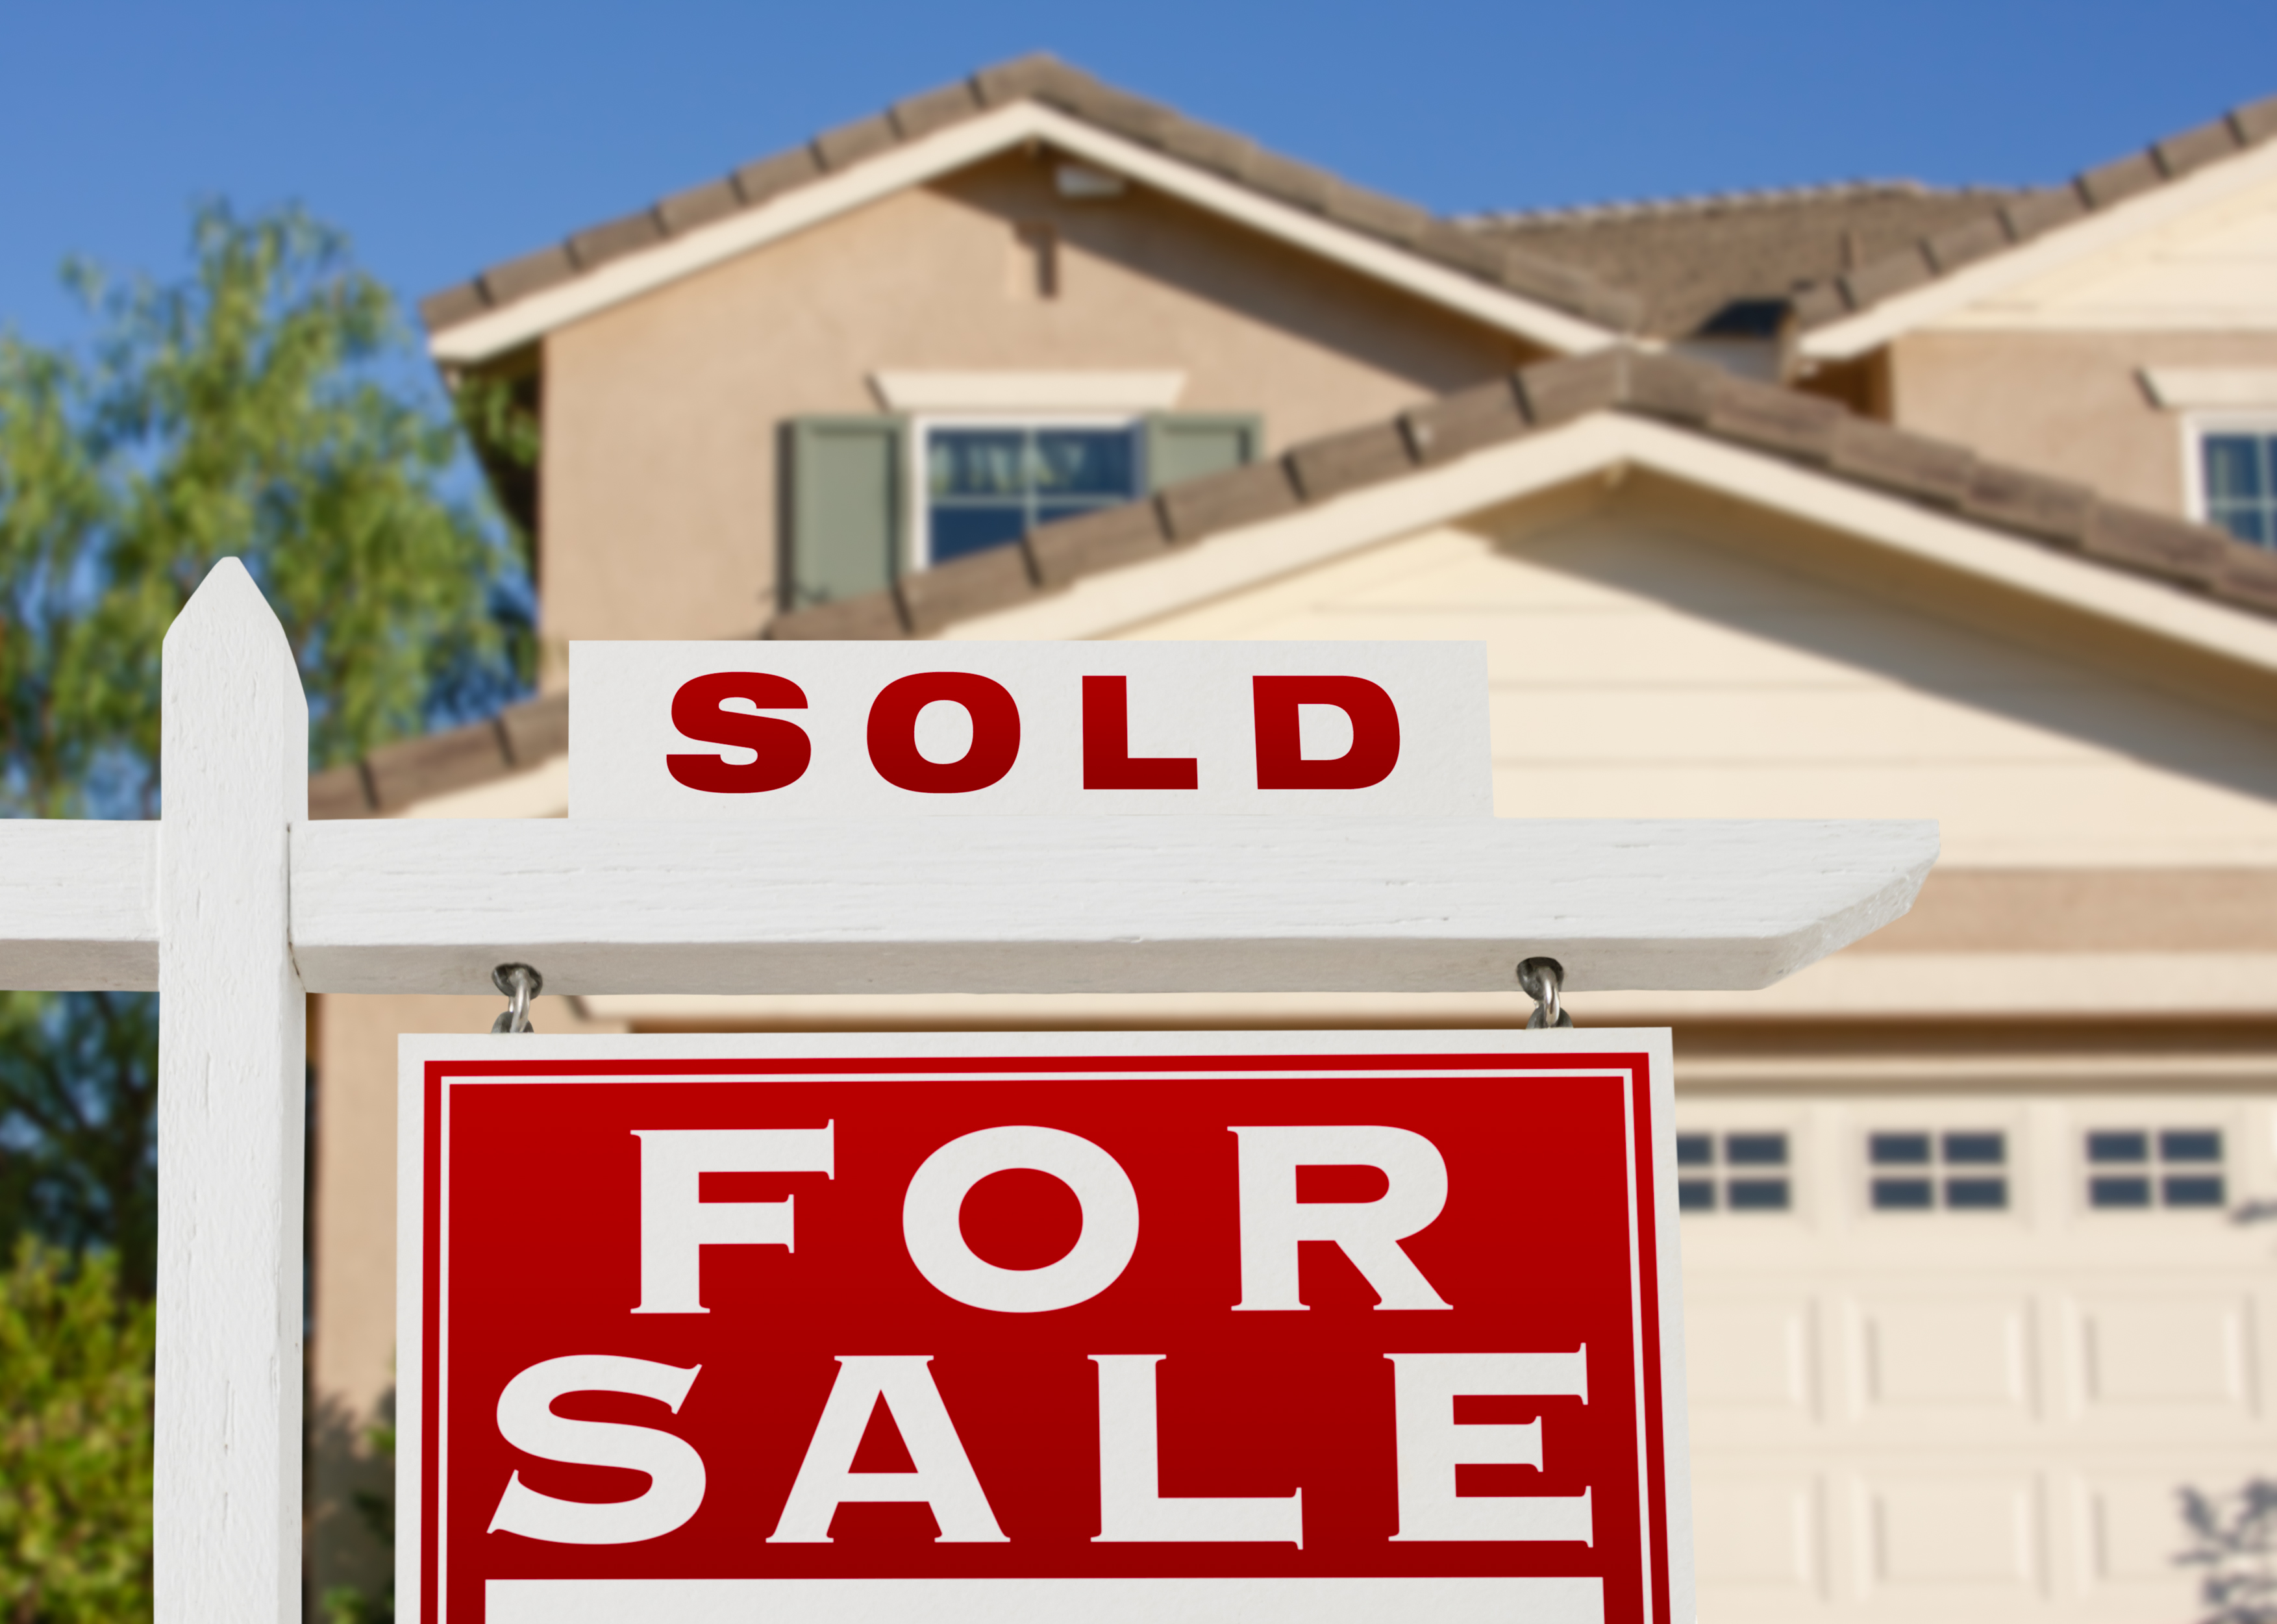 Denver Metro Area Housing Market Shows No Signs Of Slowing Down